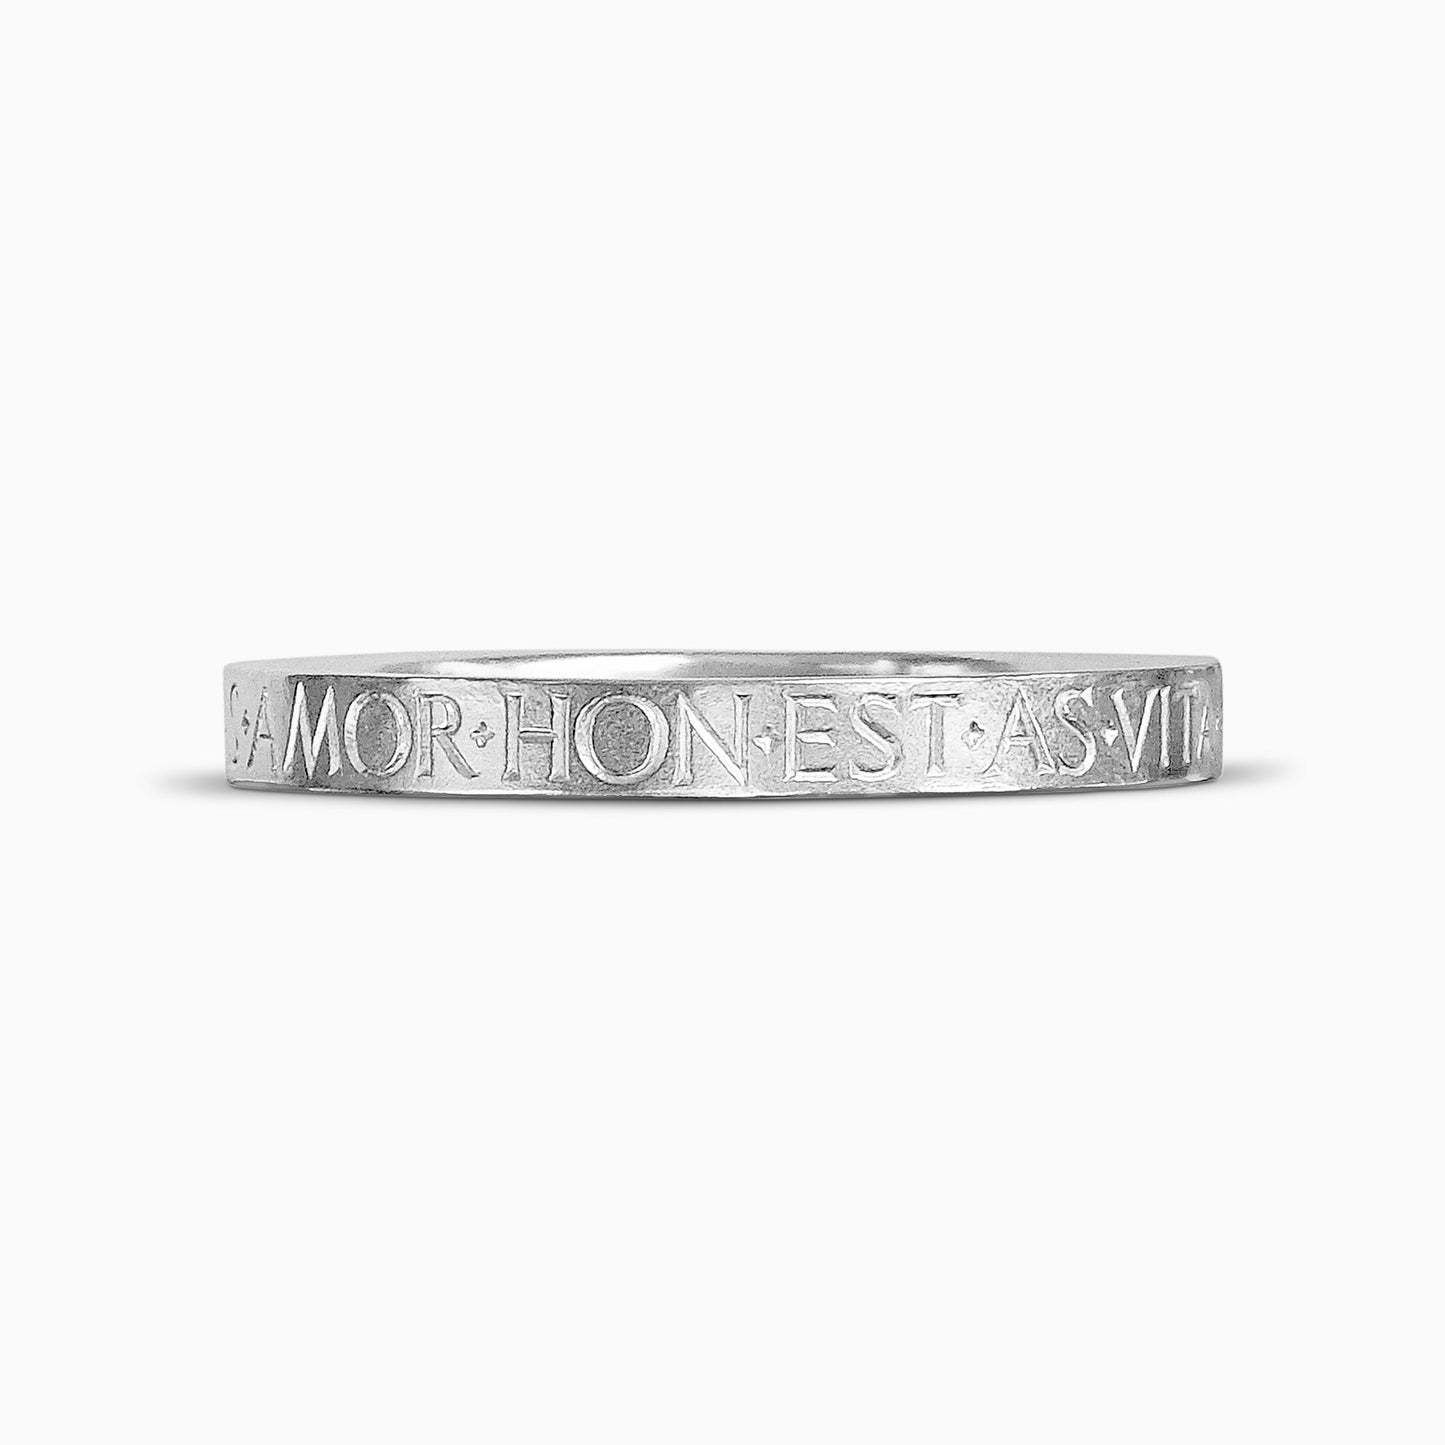 A recycled Silver bangle with Love, Honour, Courage, Hope, Peace,Truth and Life deeply engraved in Roman capitals around the outside. Width 8mm. Inside diameter 64mm. 